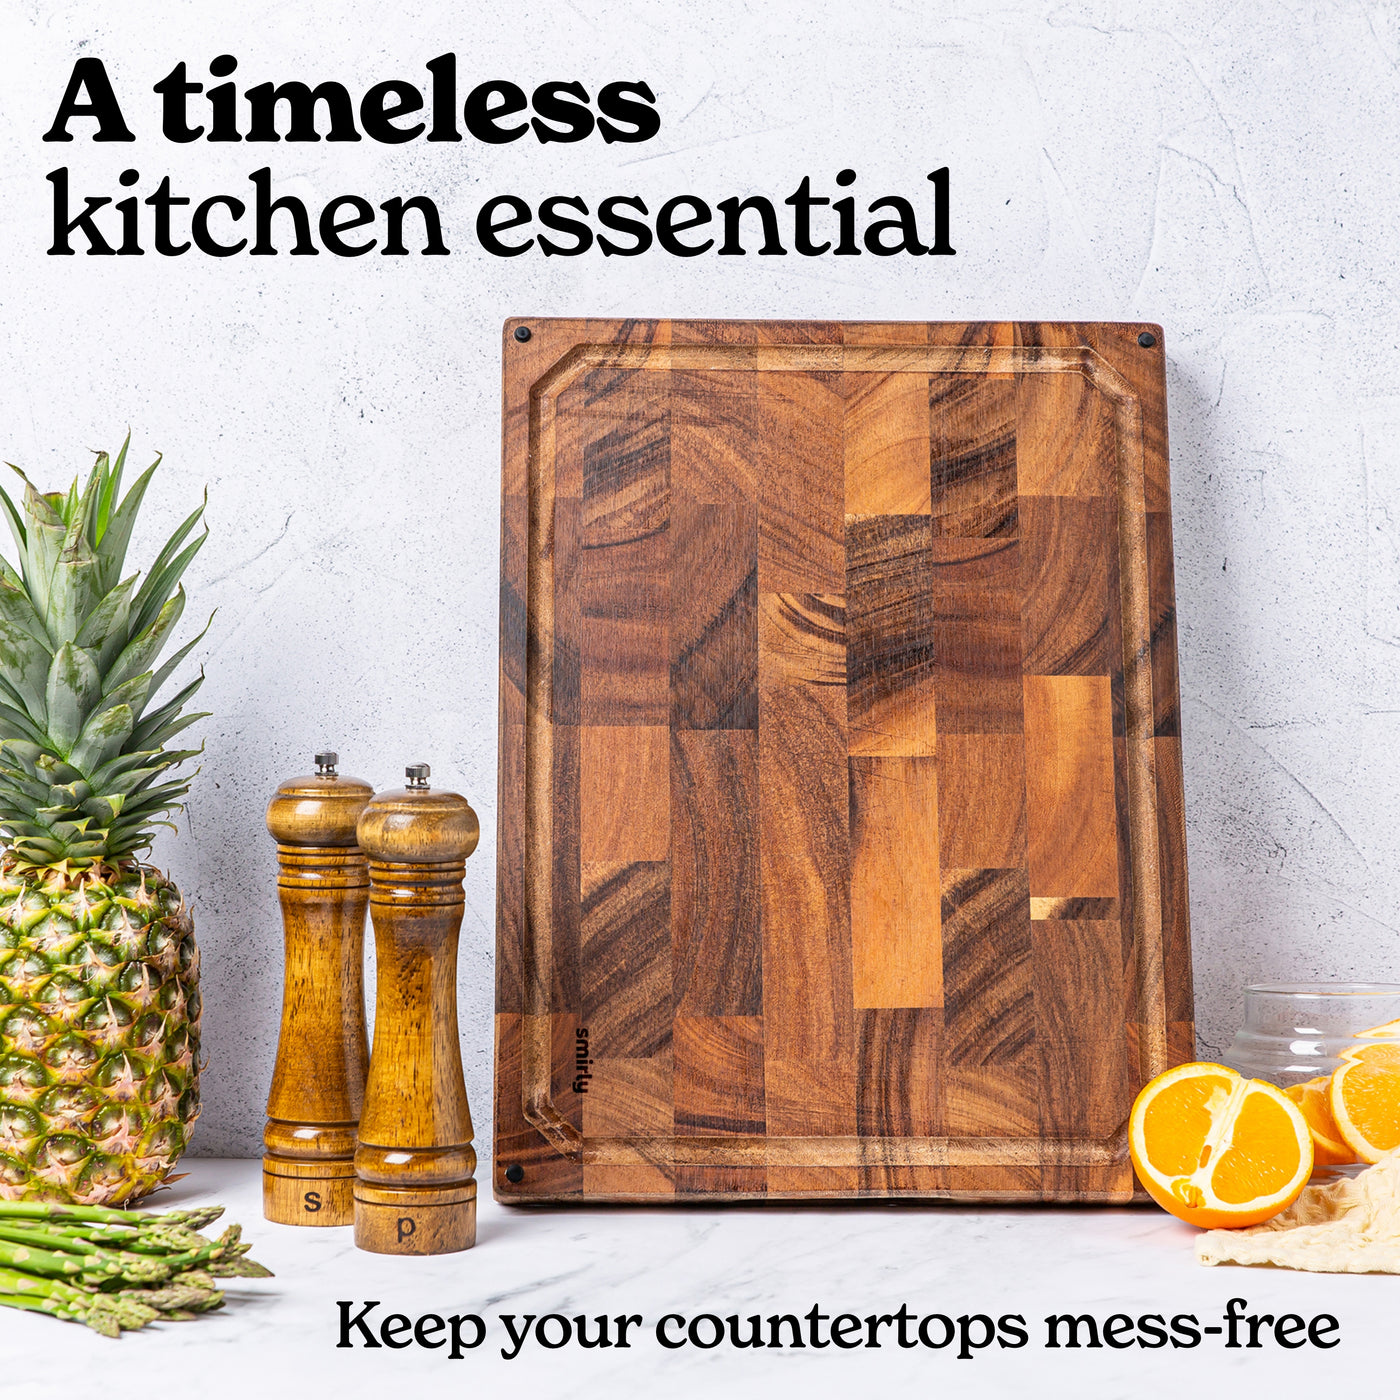 SMIRLY EXTRA LARGE ECO FRIENDLY PREMIUM BAMBOO WOOD CUTTING BOARD